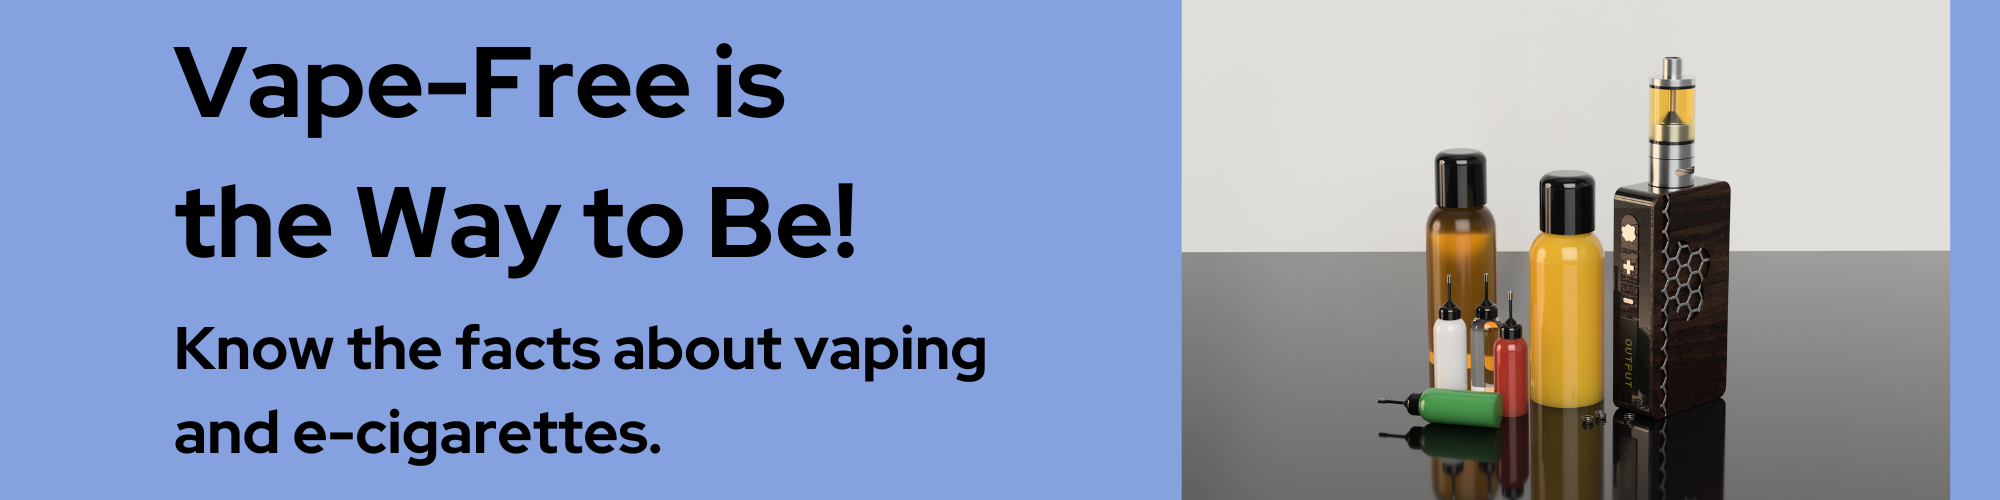 Vape free is the way to be! Know the facts about vaping and e-cigarettes.